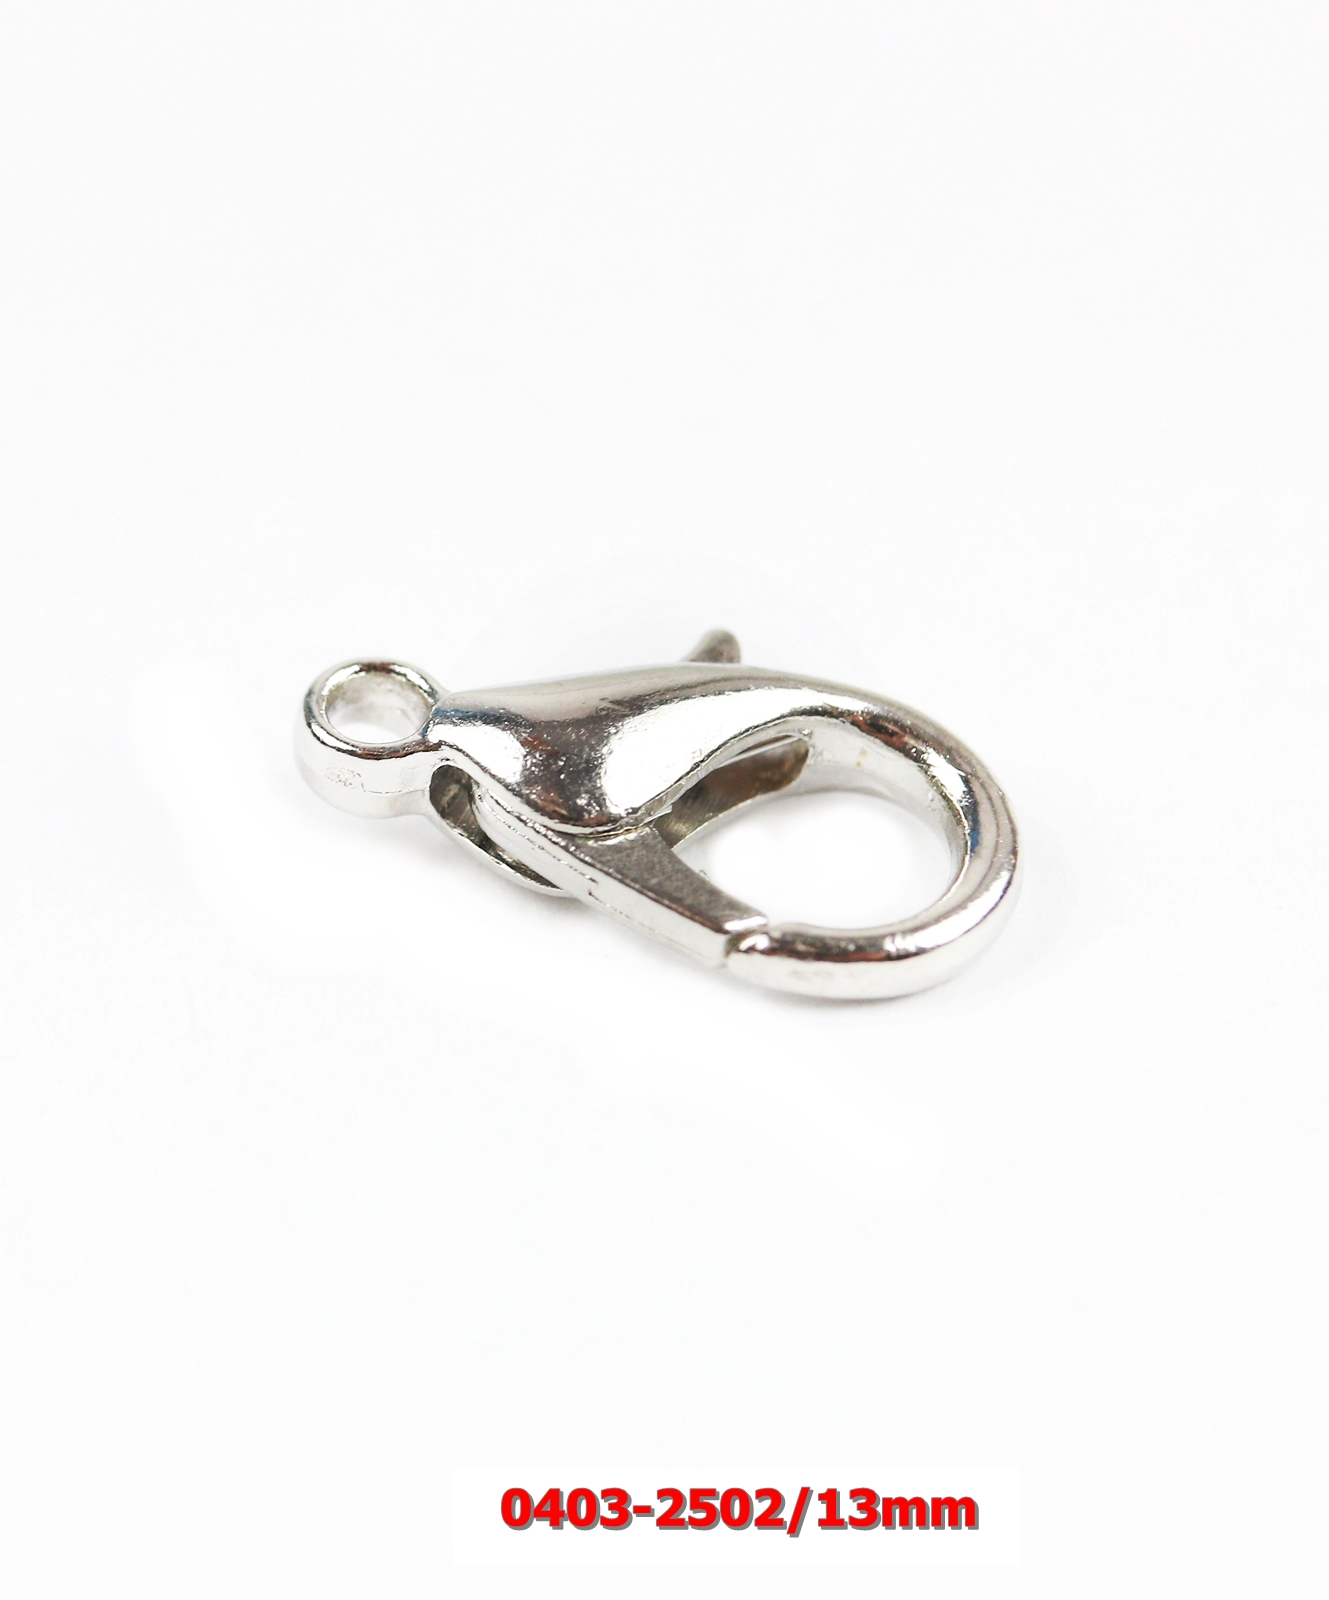 Lobster Claw Clasps, lenght 13mm (100 pcs/bag)